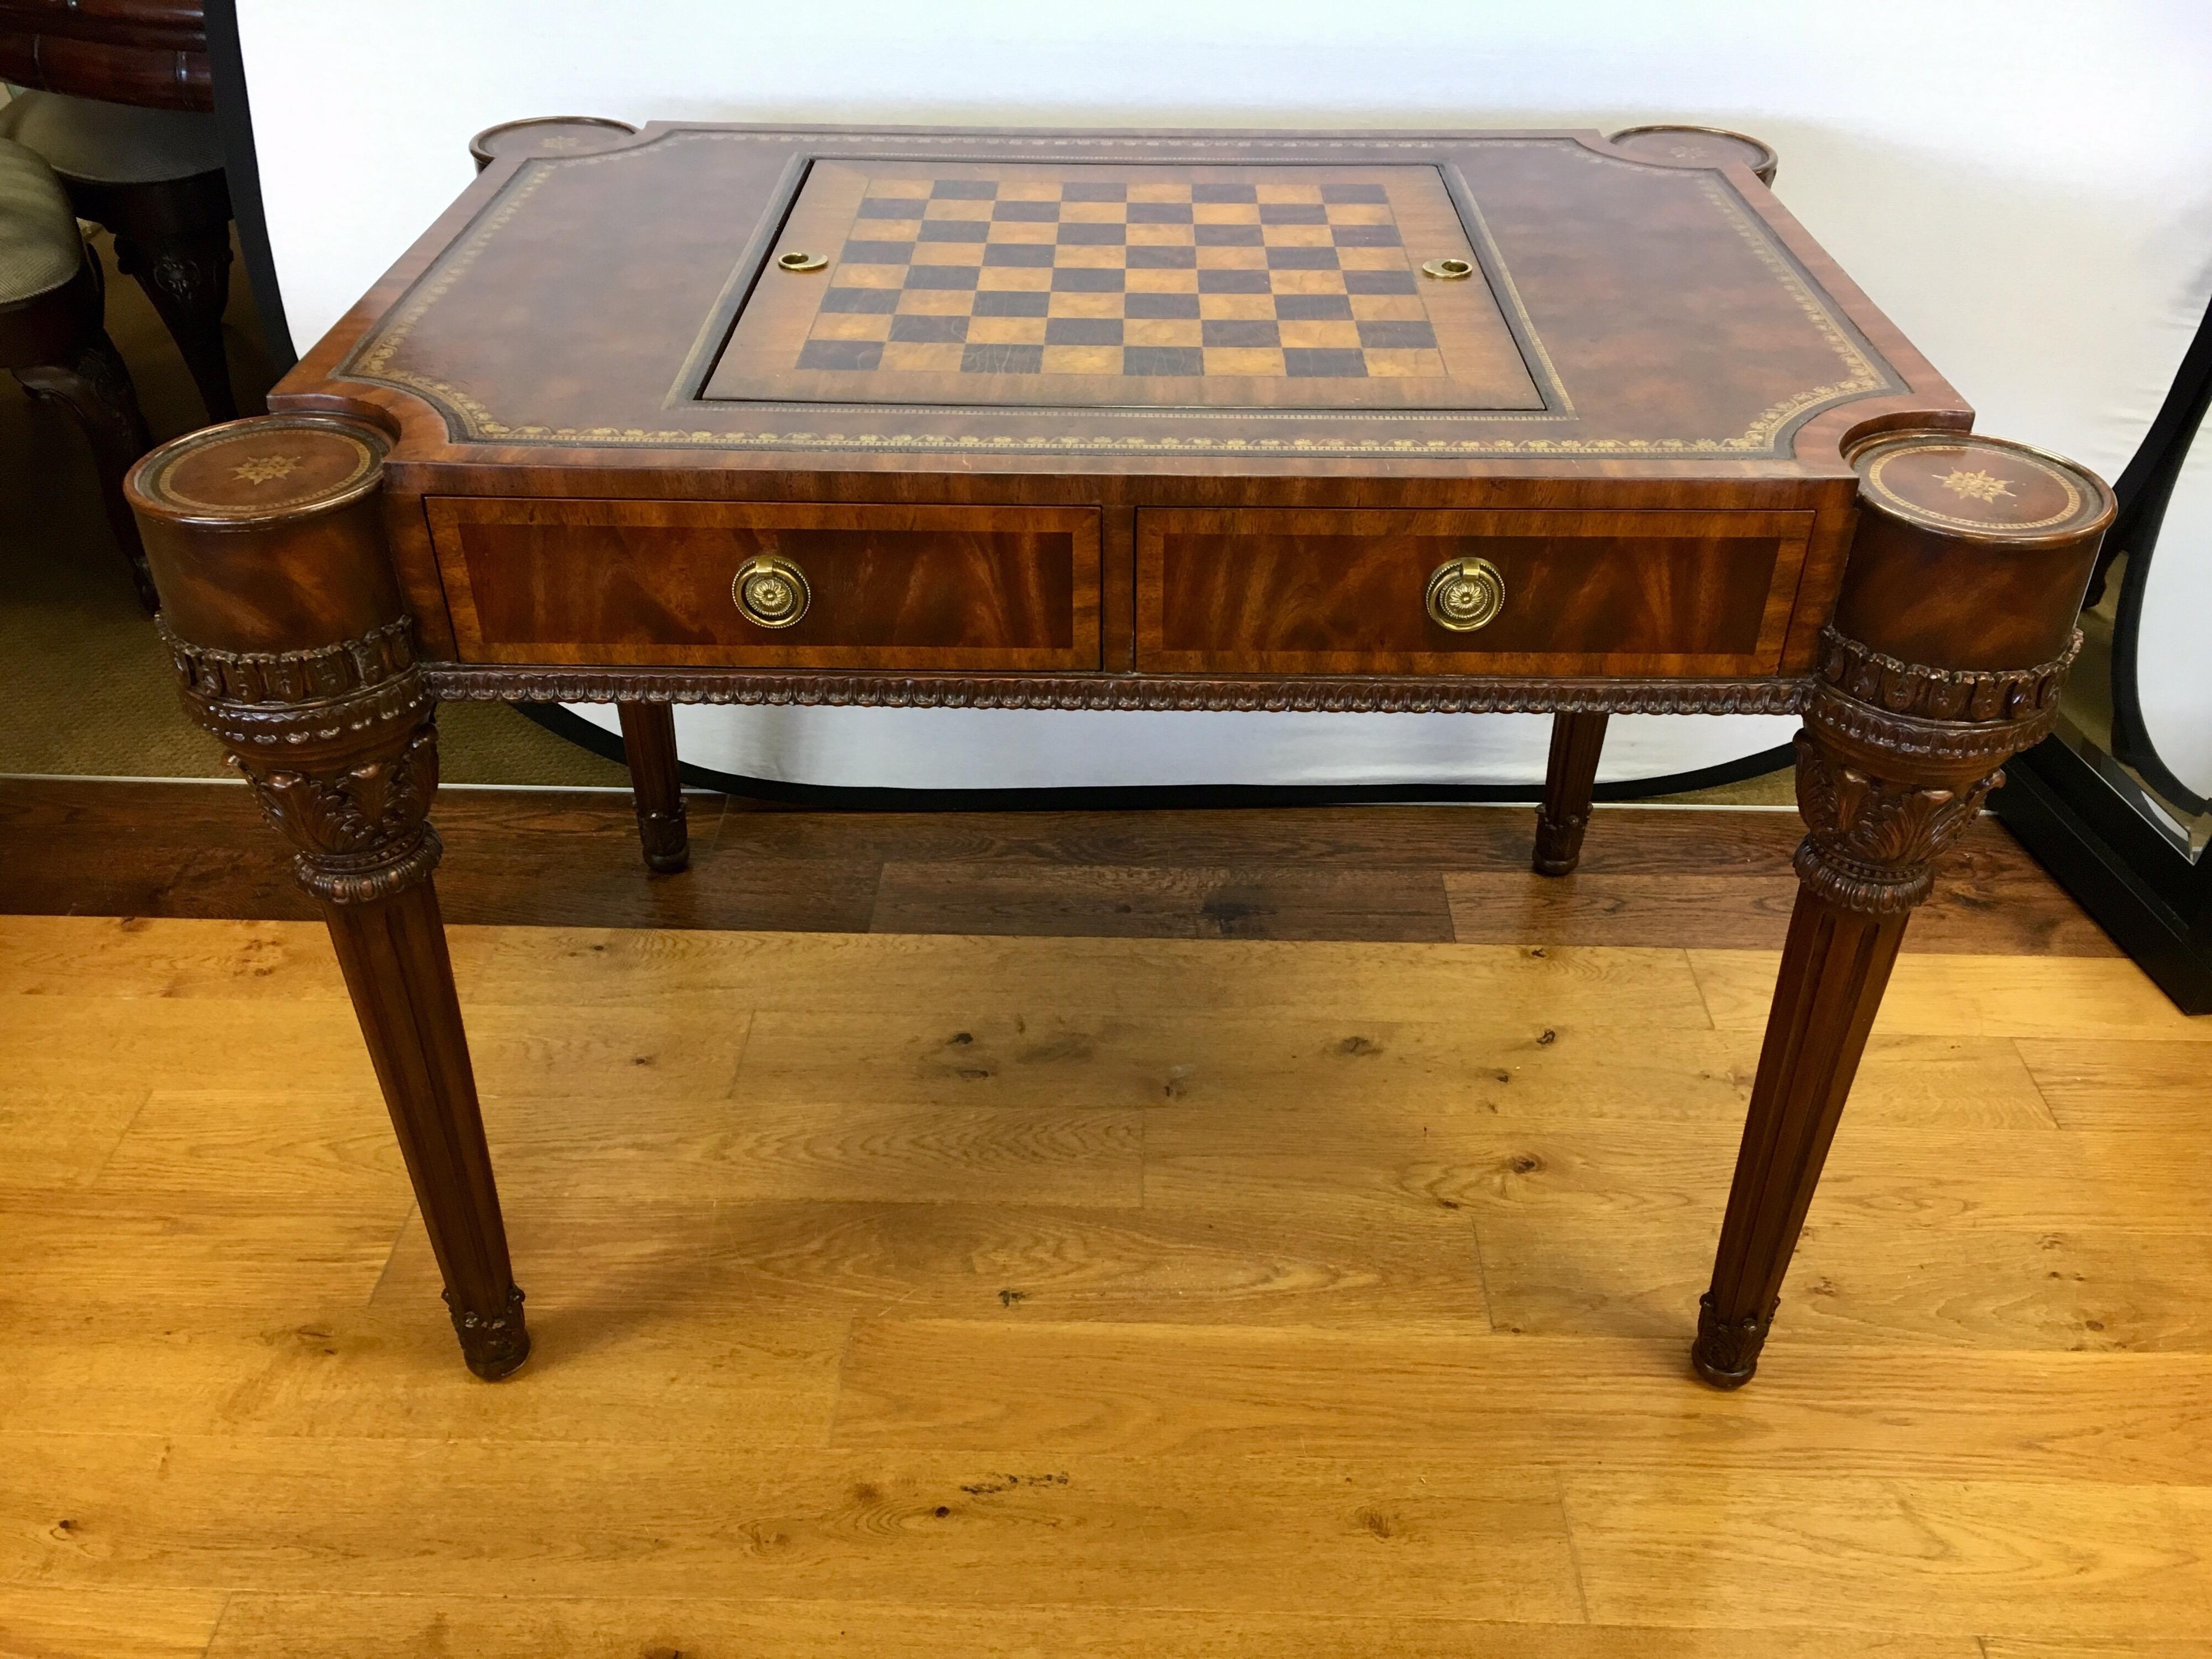 Magnificent signed Maitland-Smith four drawer game table with leather top and multiple game combinations with floating top. Comes with accessories to play all your favorite games. Incredible
carvings throughout.